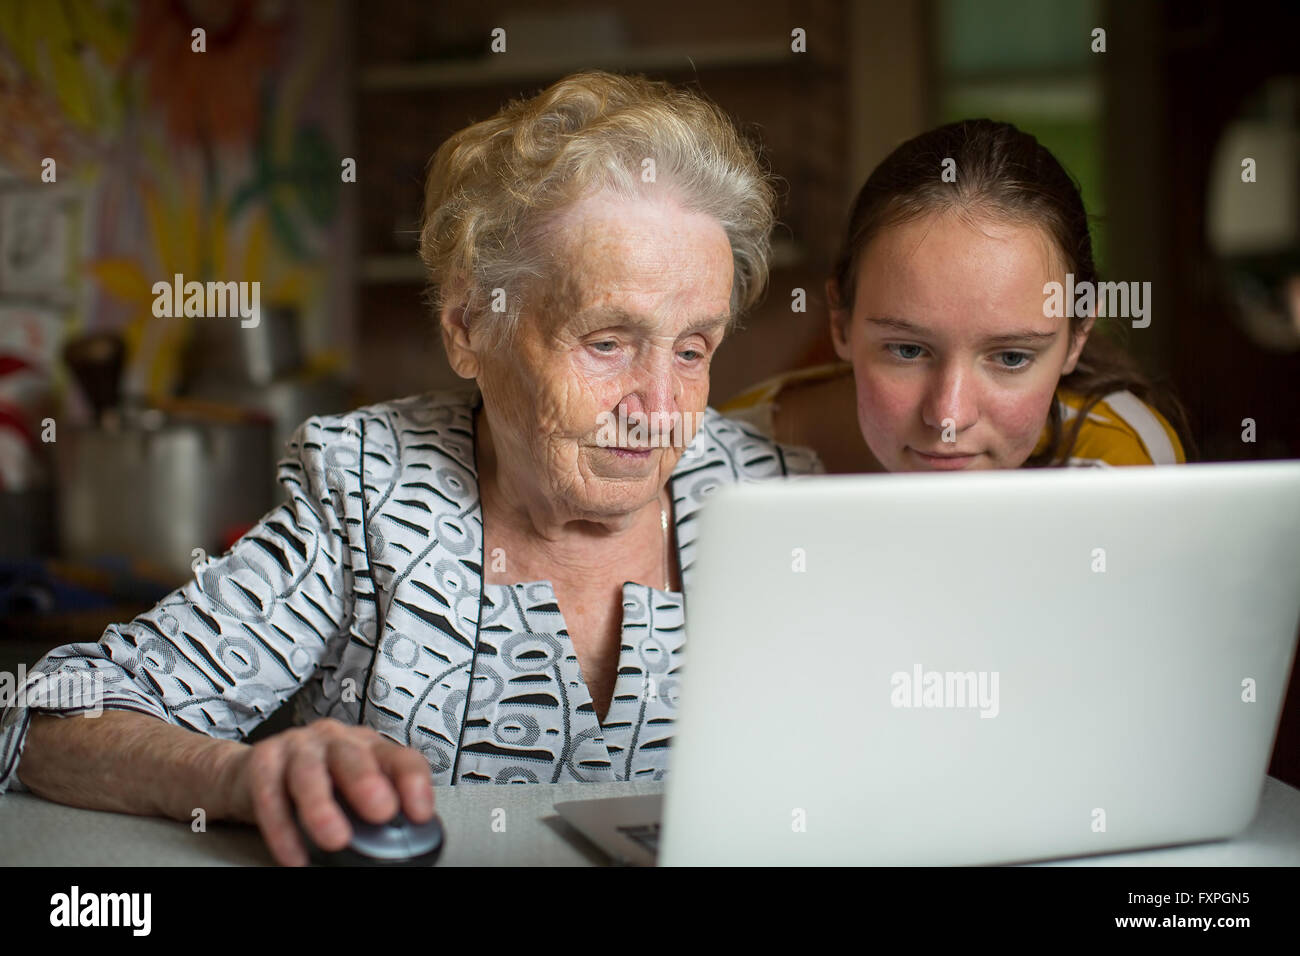 Grandmother and granddaughter learn to work on computer. Stock Photo